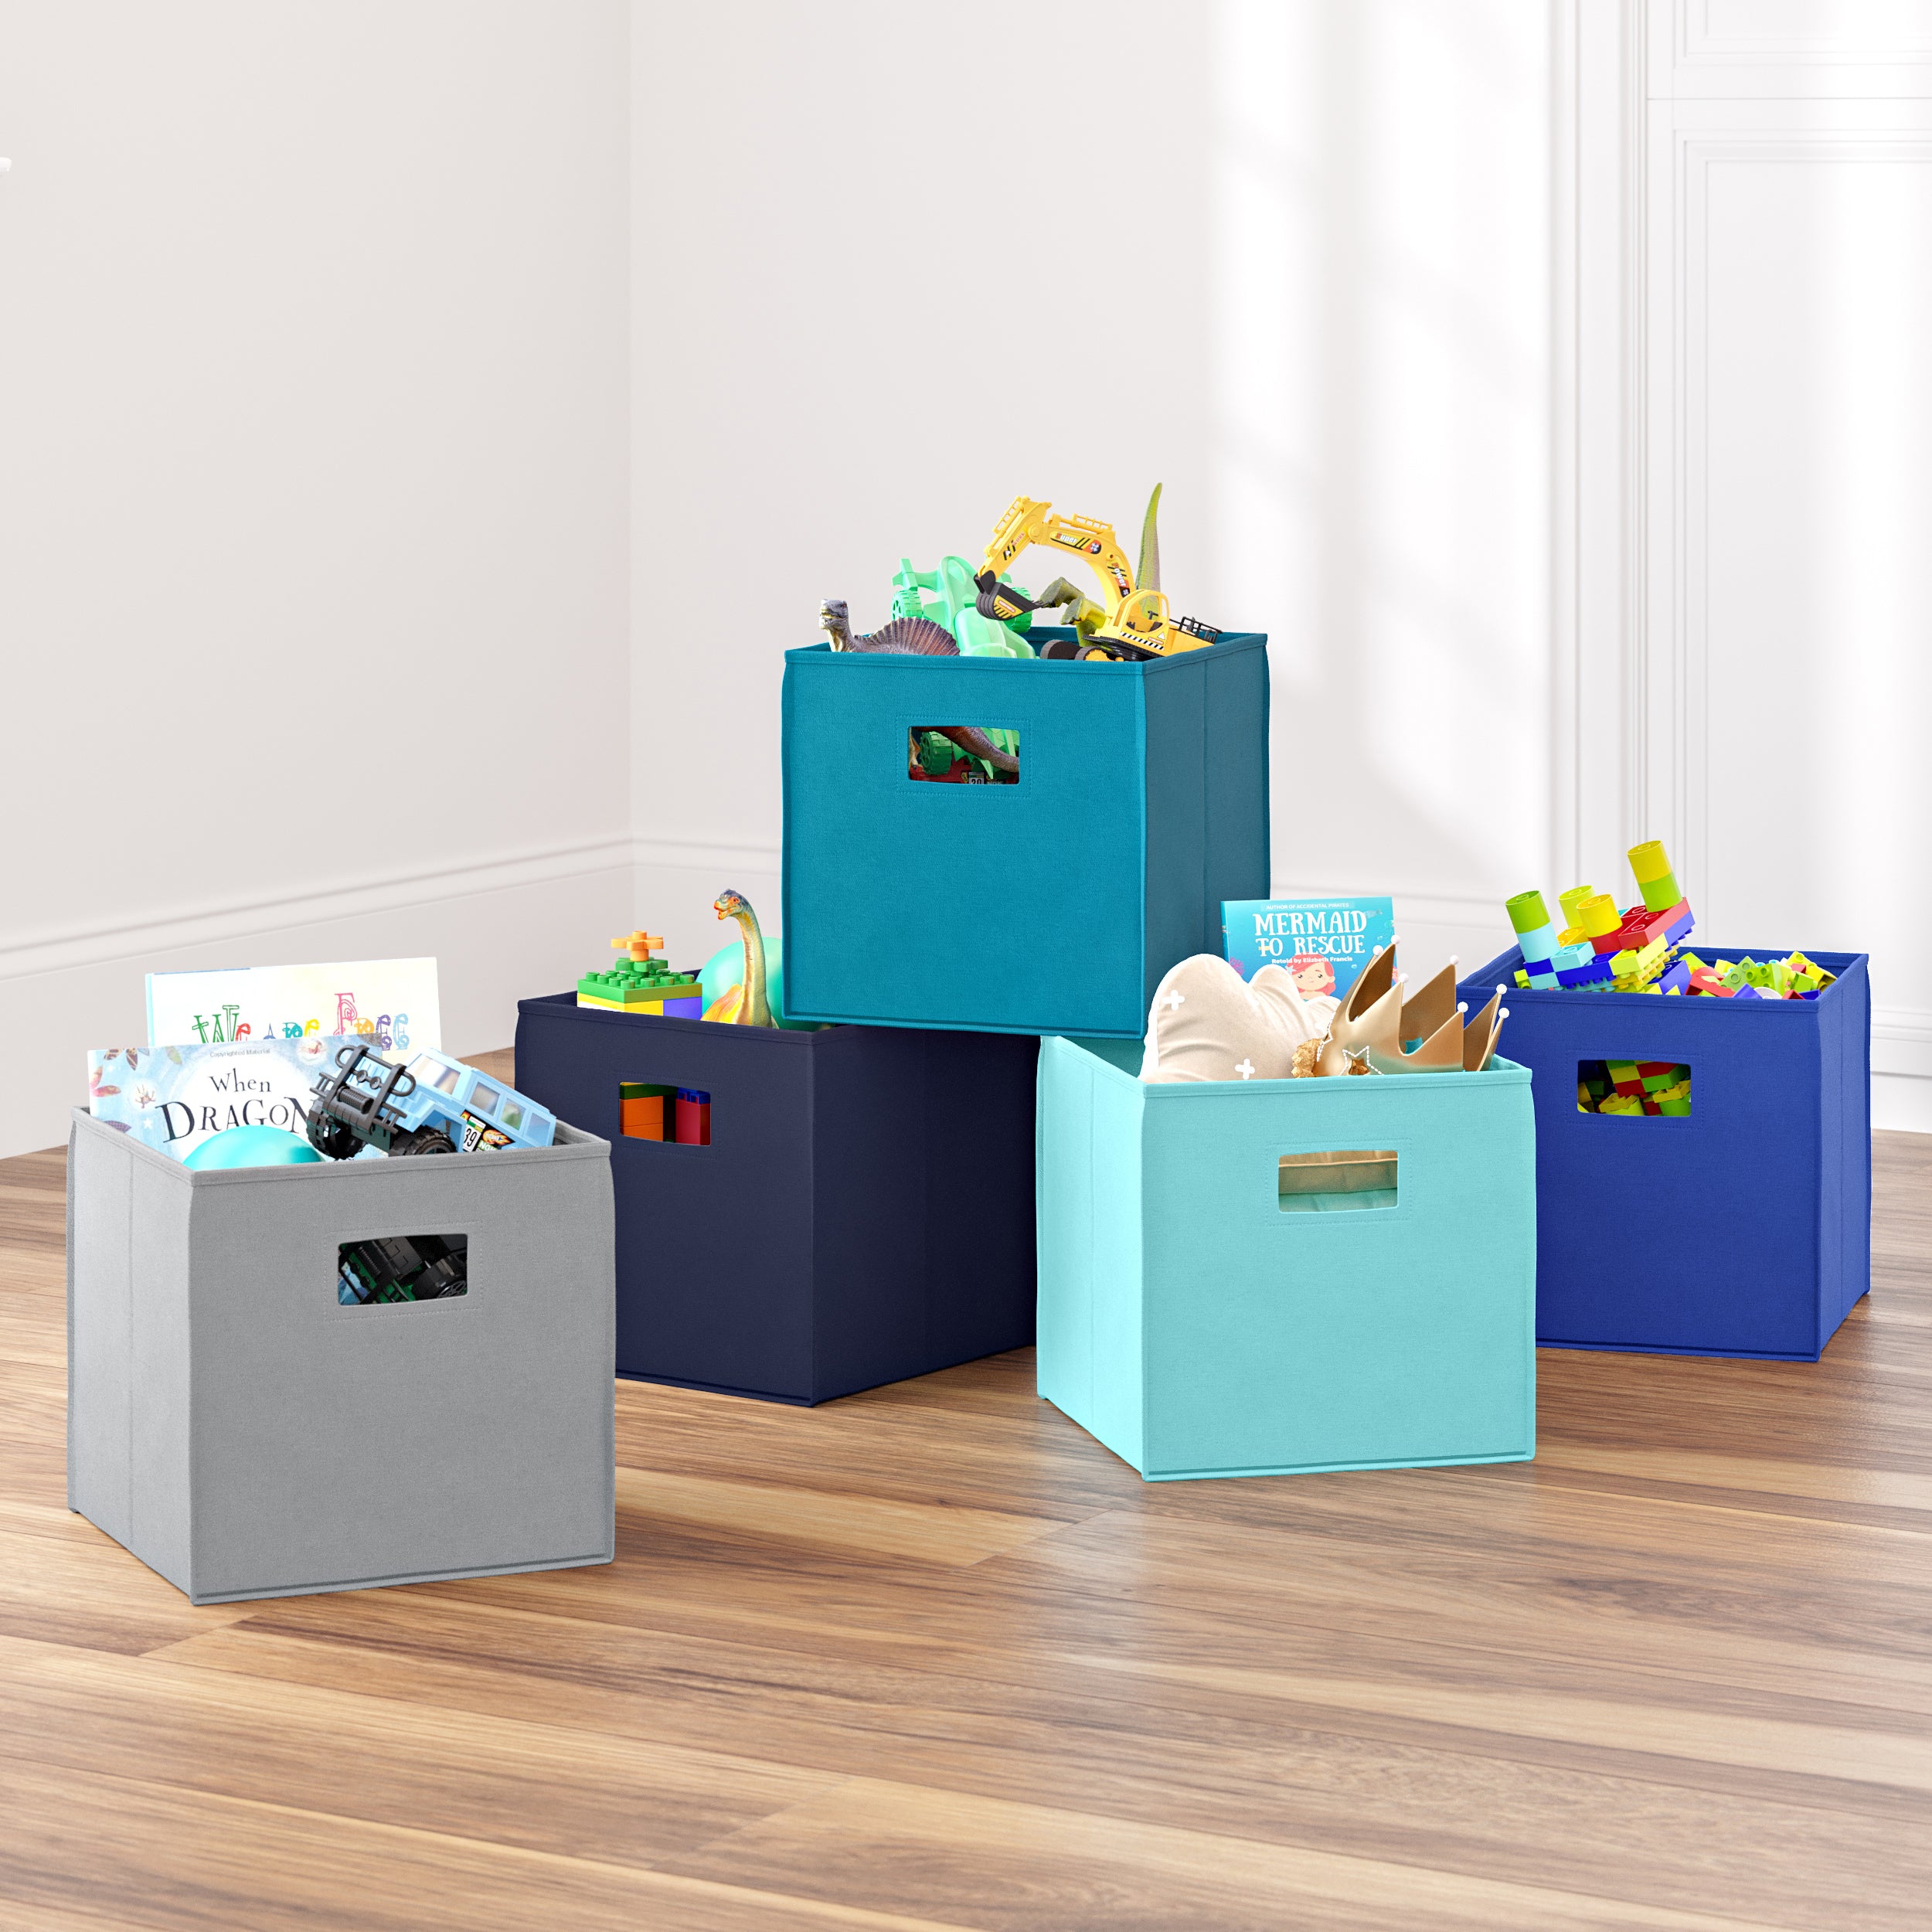 Back to school is coming up! Bliss Bins for teachers! #storagevideos #